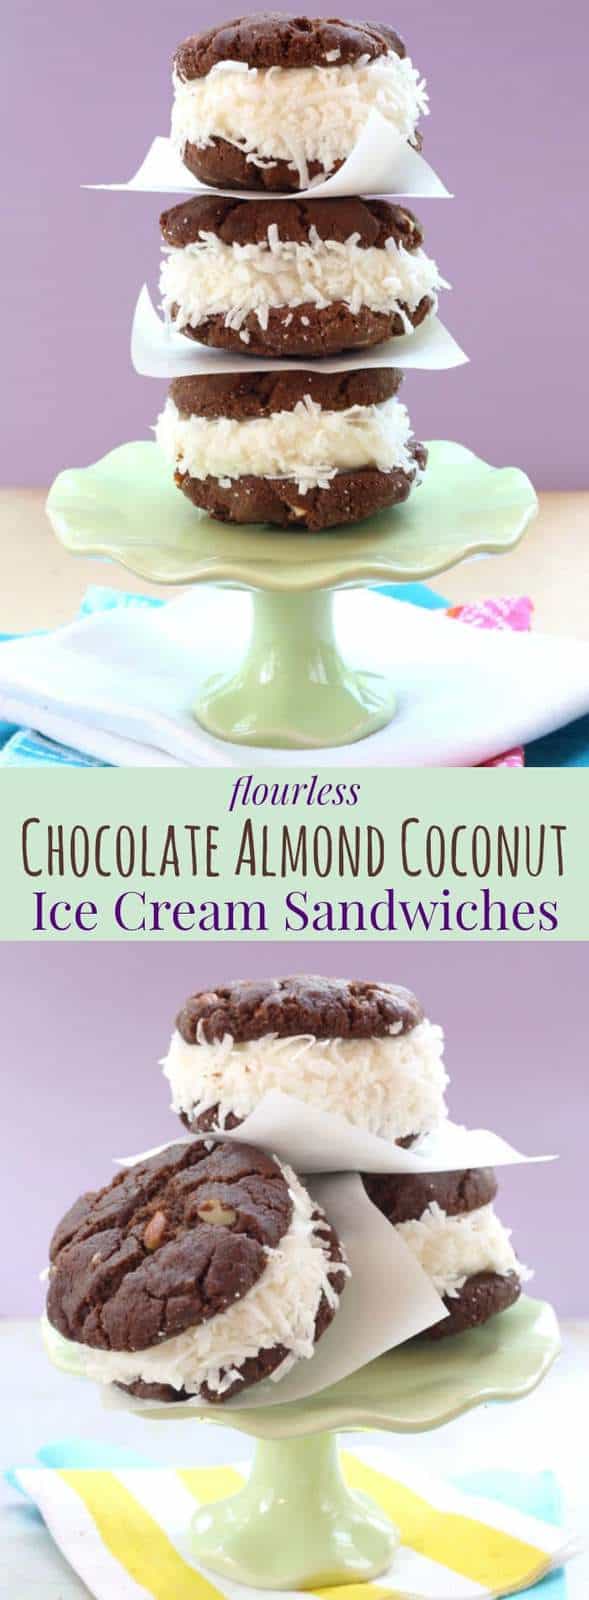 Flourless Chocolate Almond Coconut Ice Cream Sandwiches - coconut ice cream or sorbet sandwiched between two chocolaty cookies is a fun frozen dessert that's gluten free with a dairy-free option. |cupcakesandkalechips.com